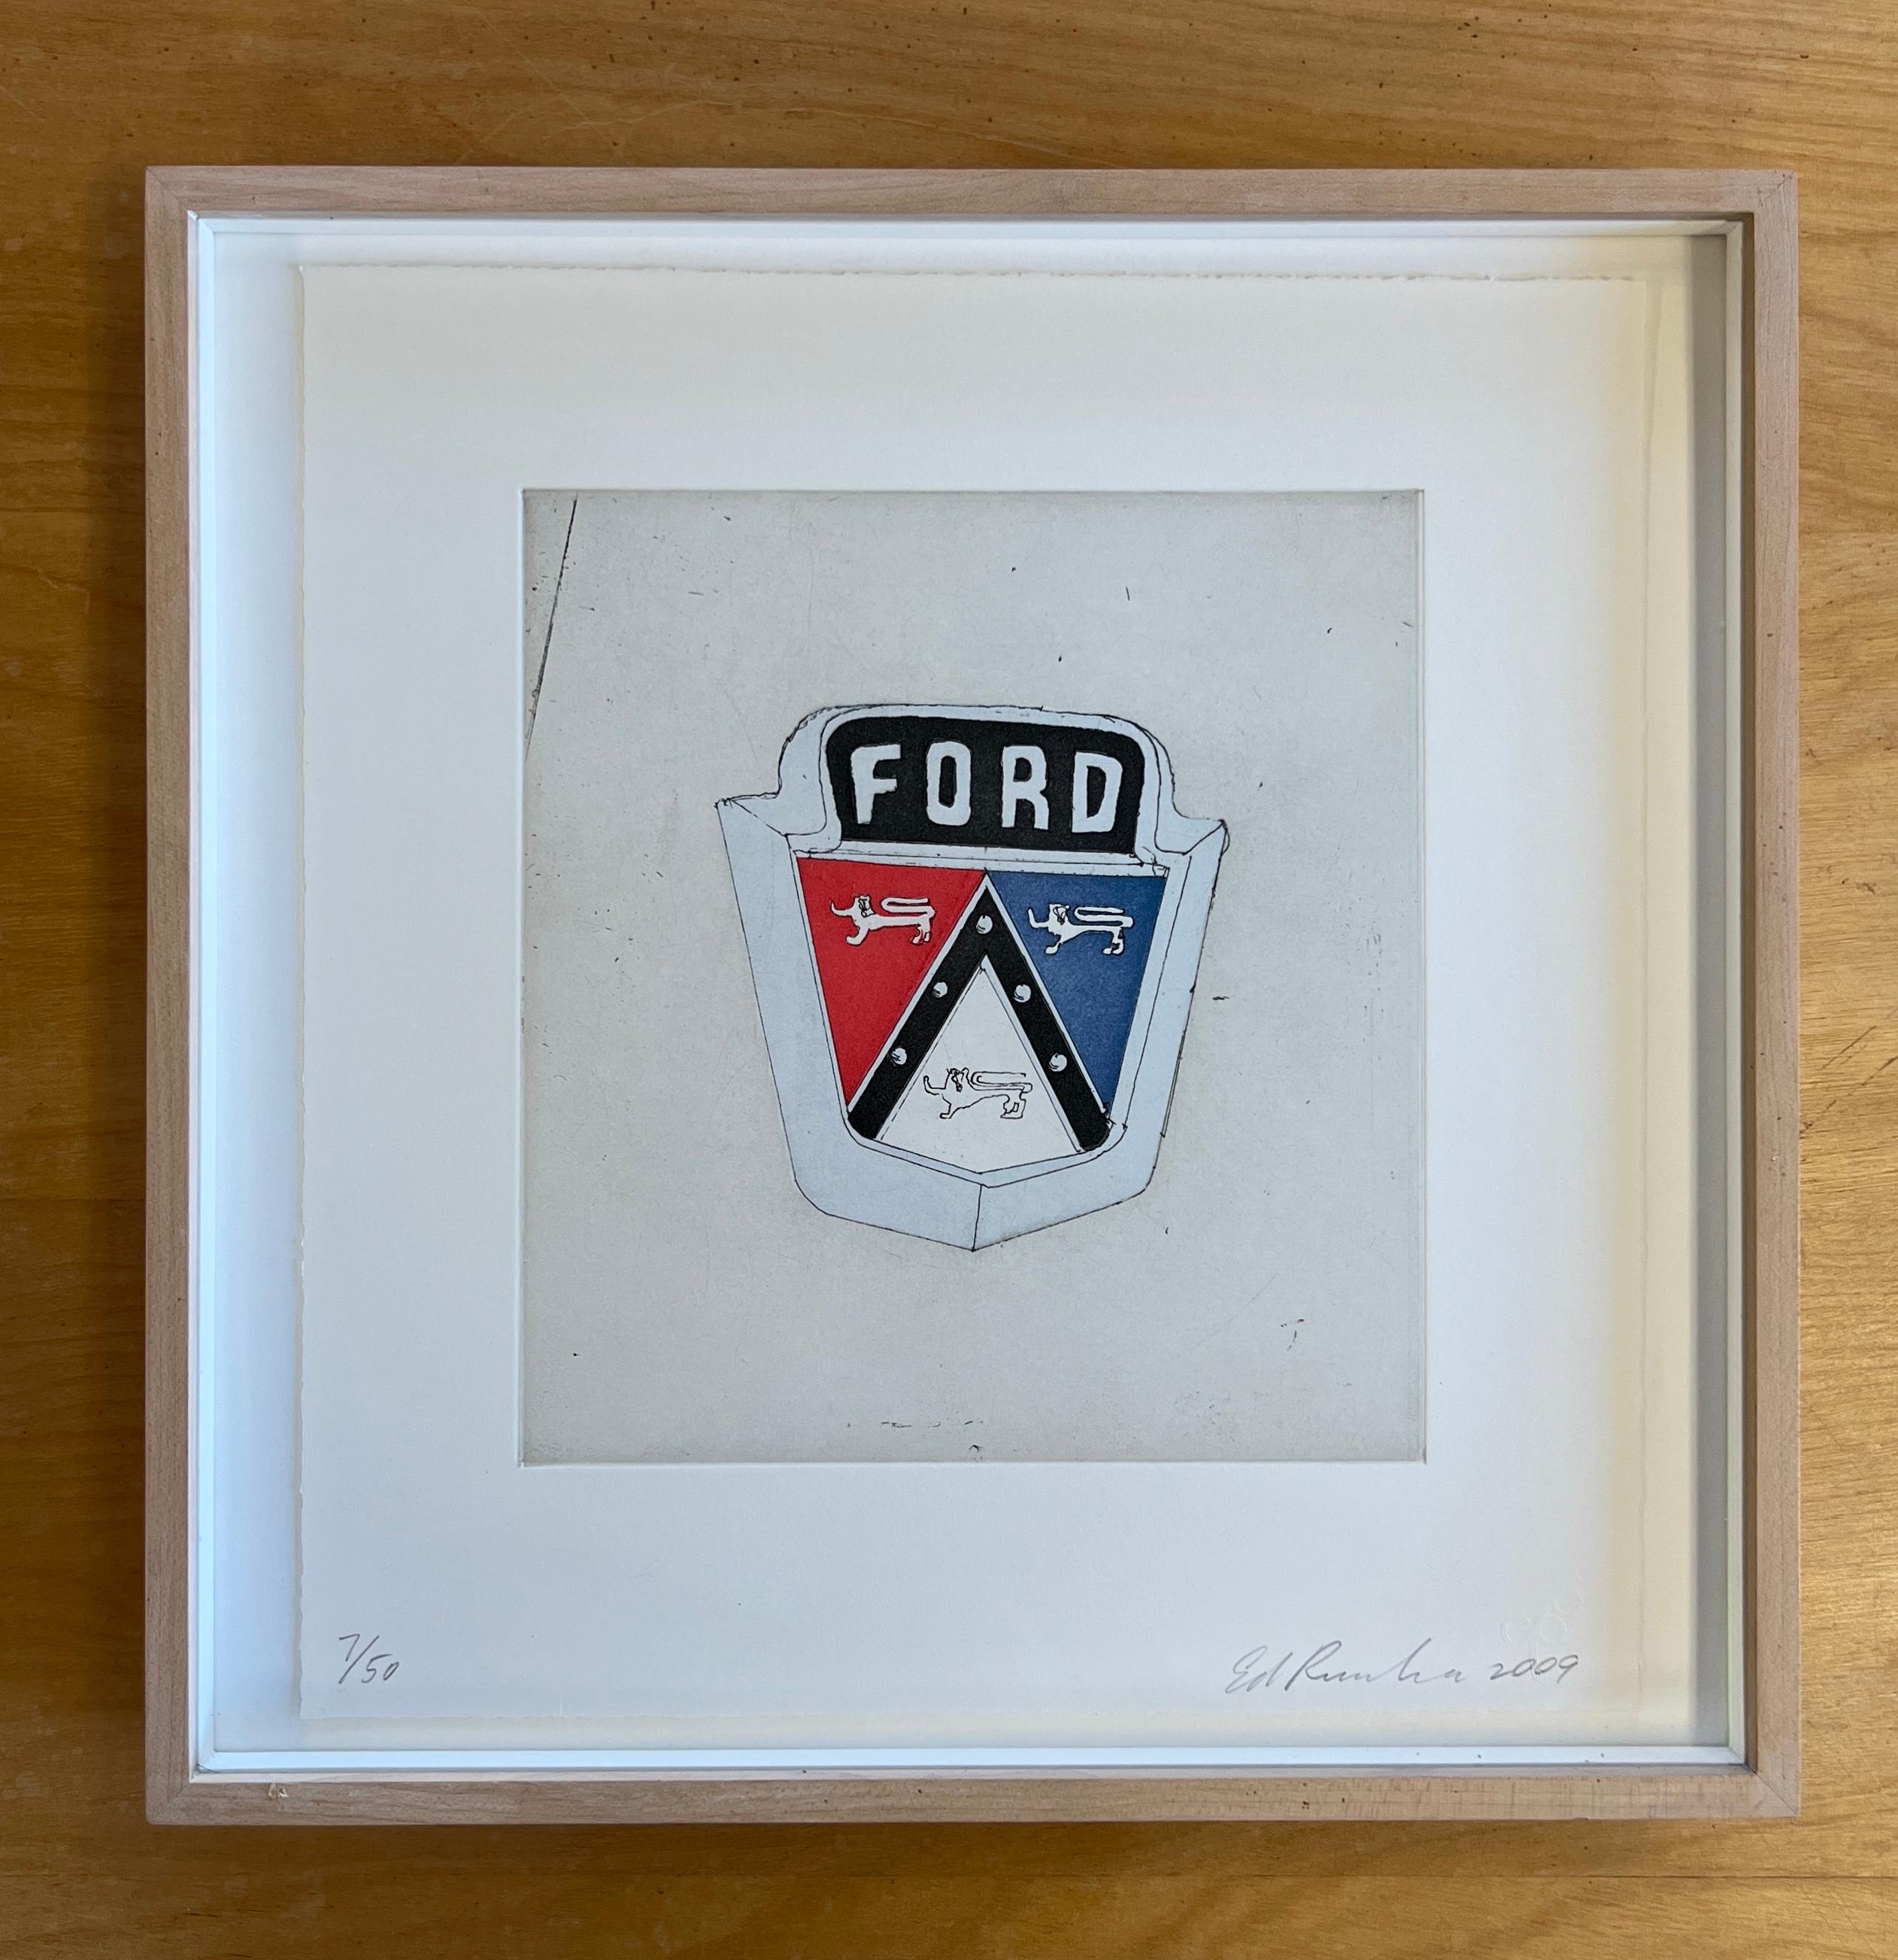 Ed Ruscha “Ford” Motor City 2009

This is one of the 